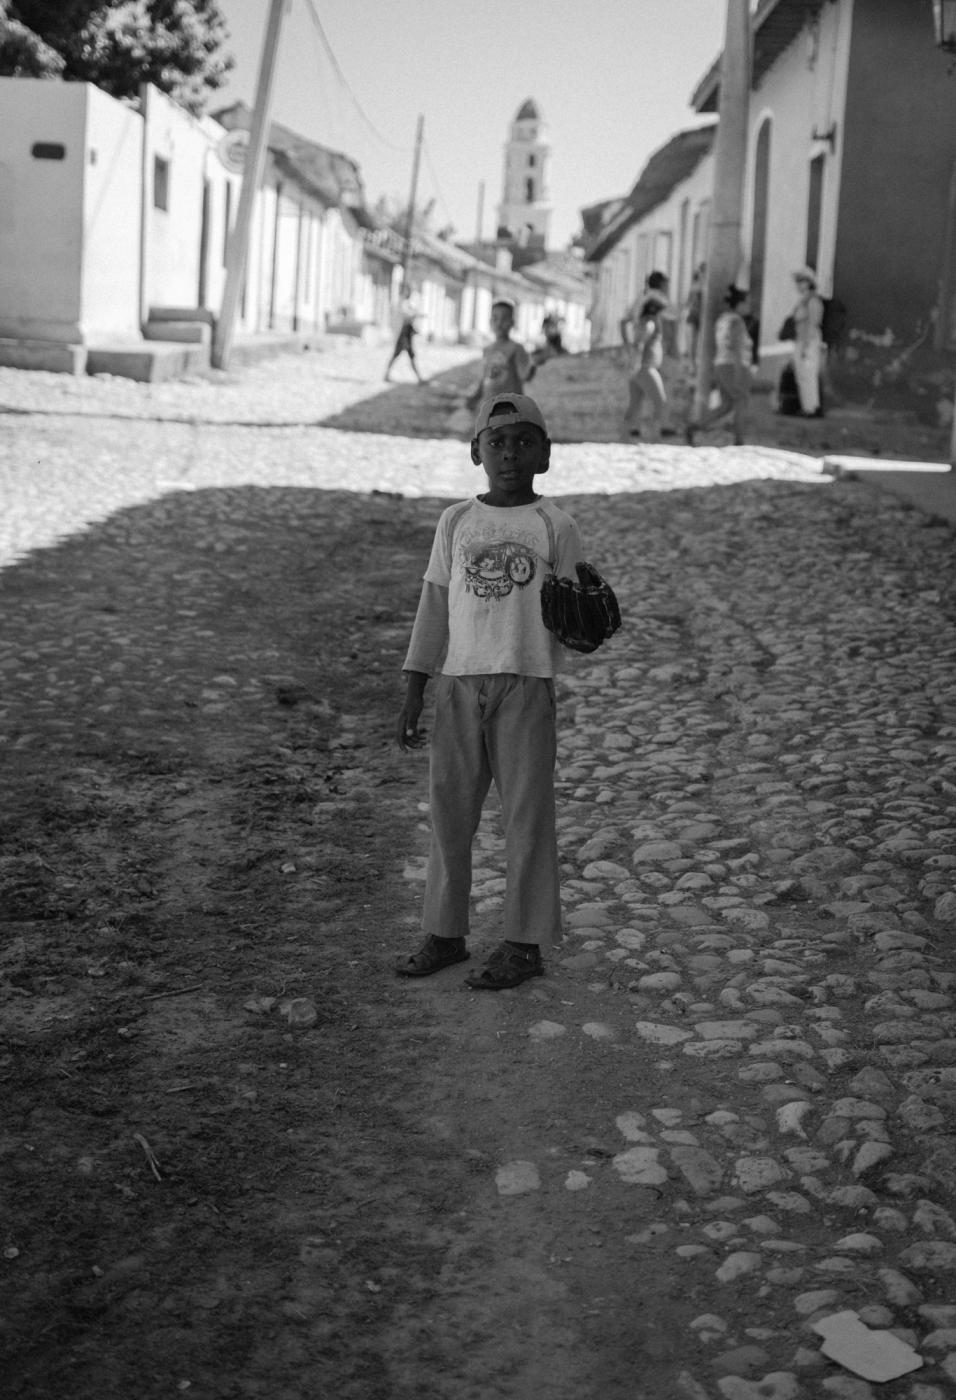 Cuban atmosphere. Pictures from... the biggest caribbean island. 